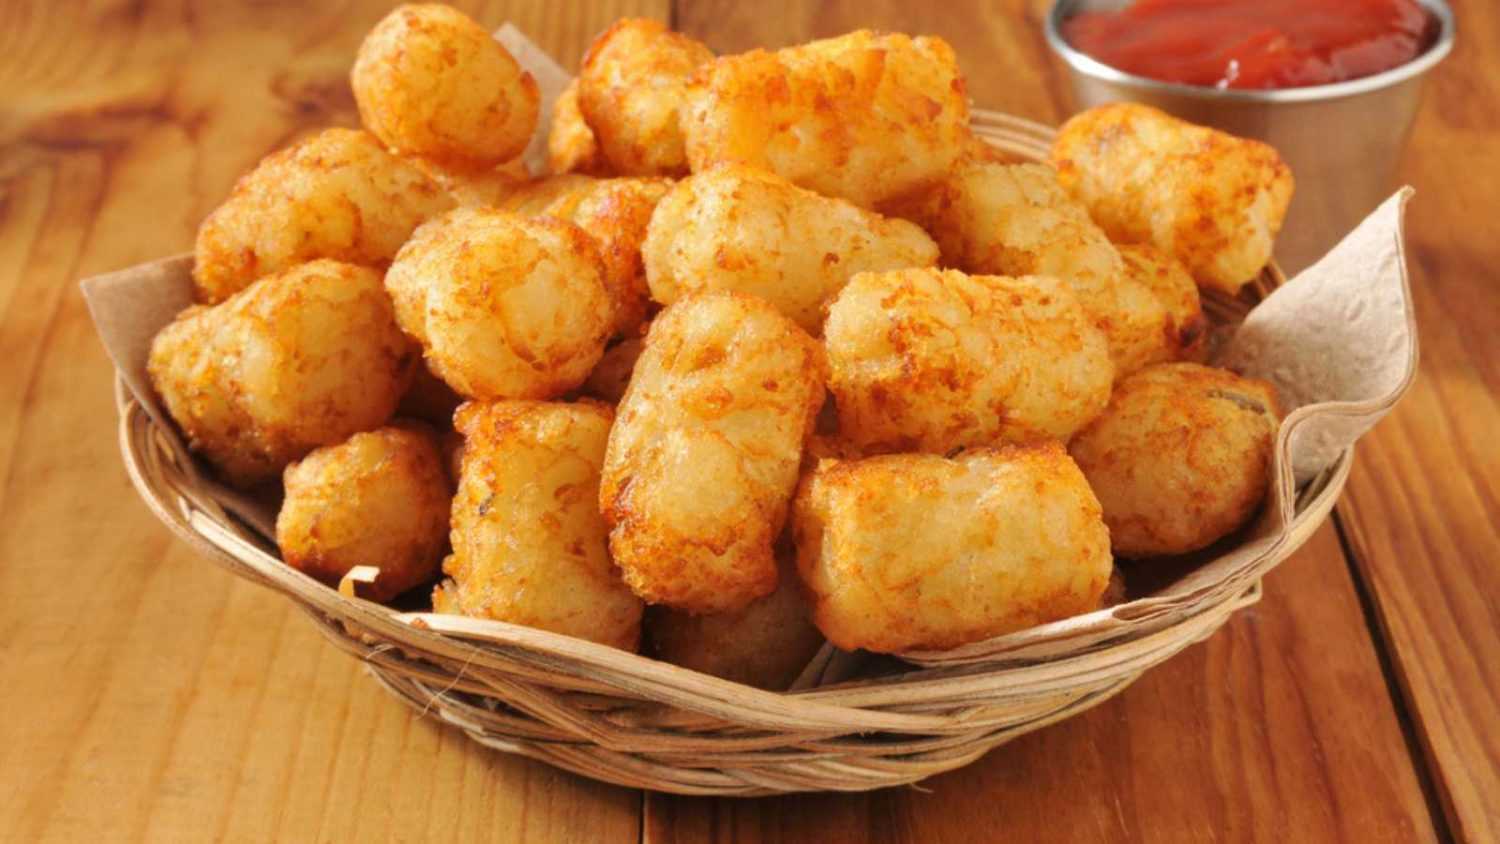 A basket of tater tots on a rustic wooden counter